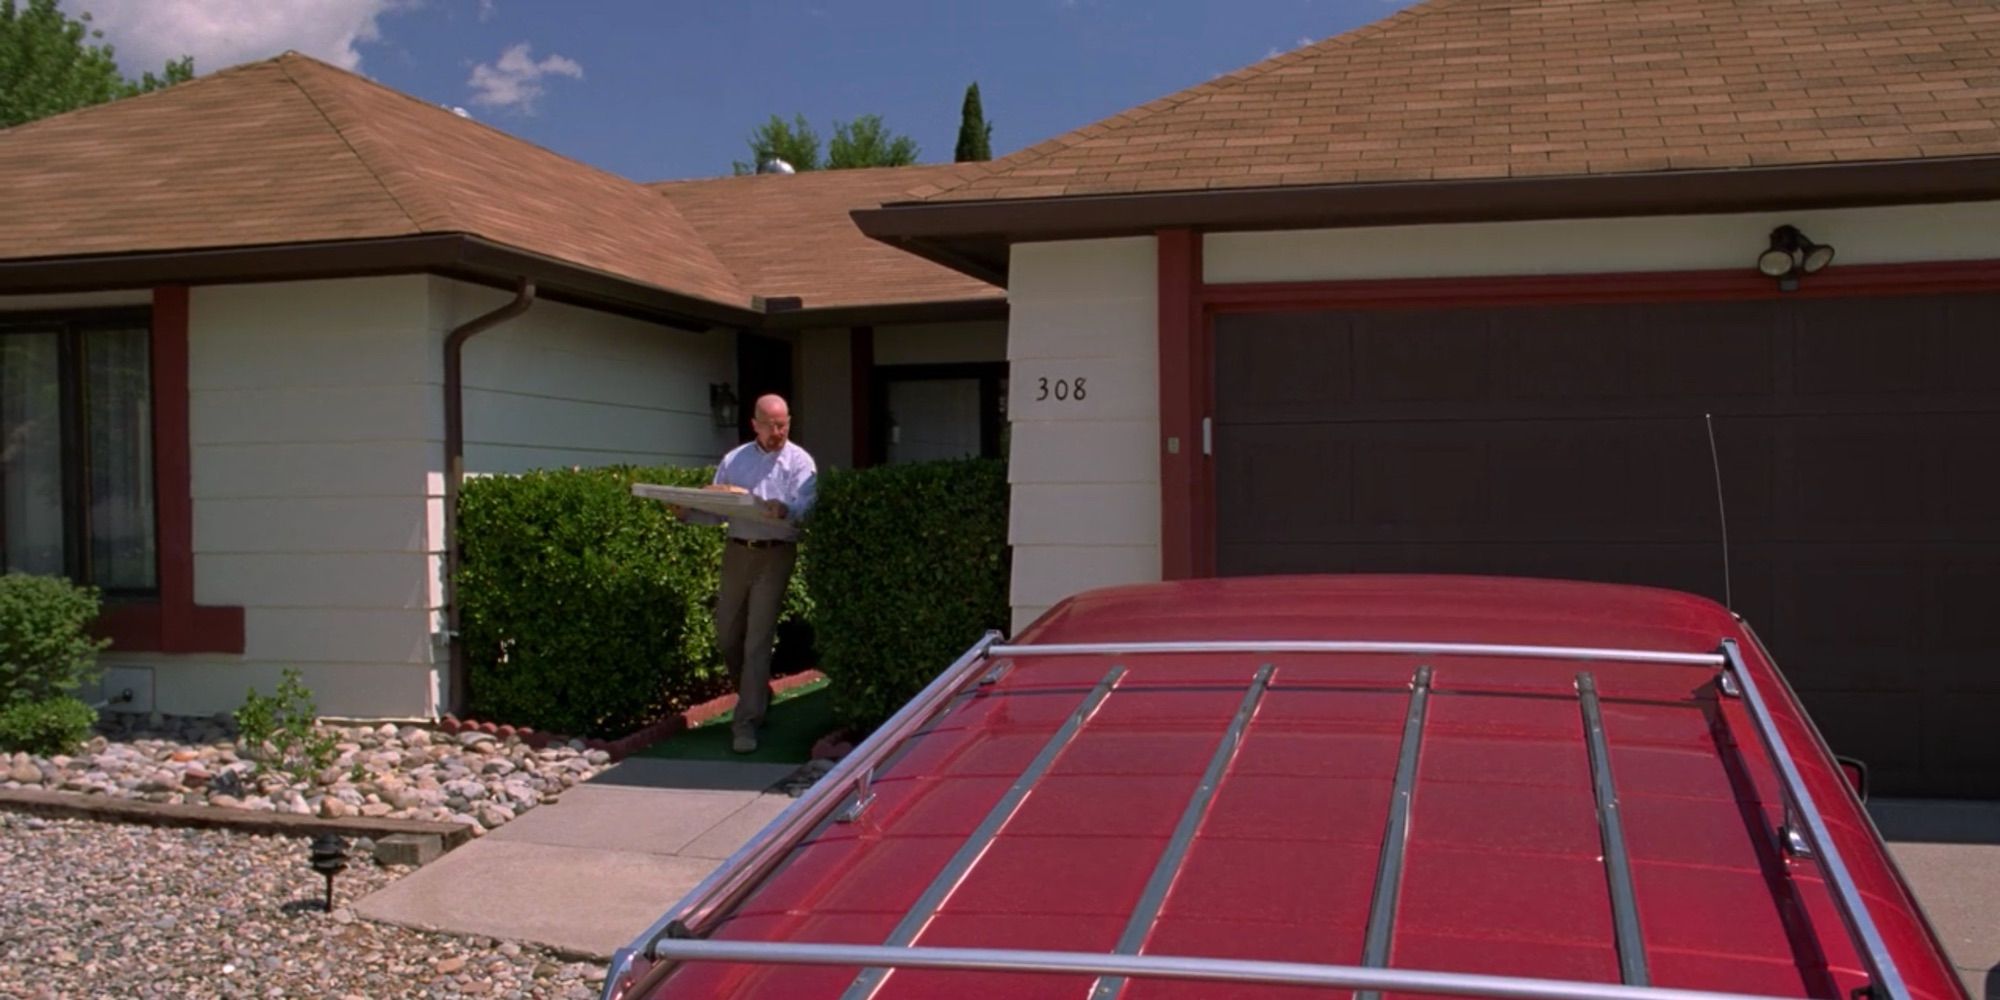 Breaking Bad house pizza on the roof of the house episode